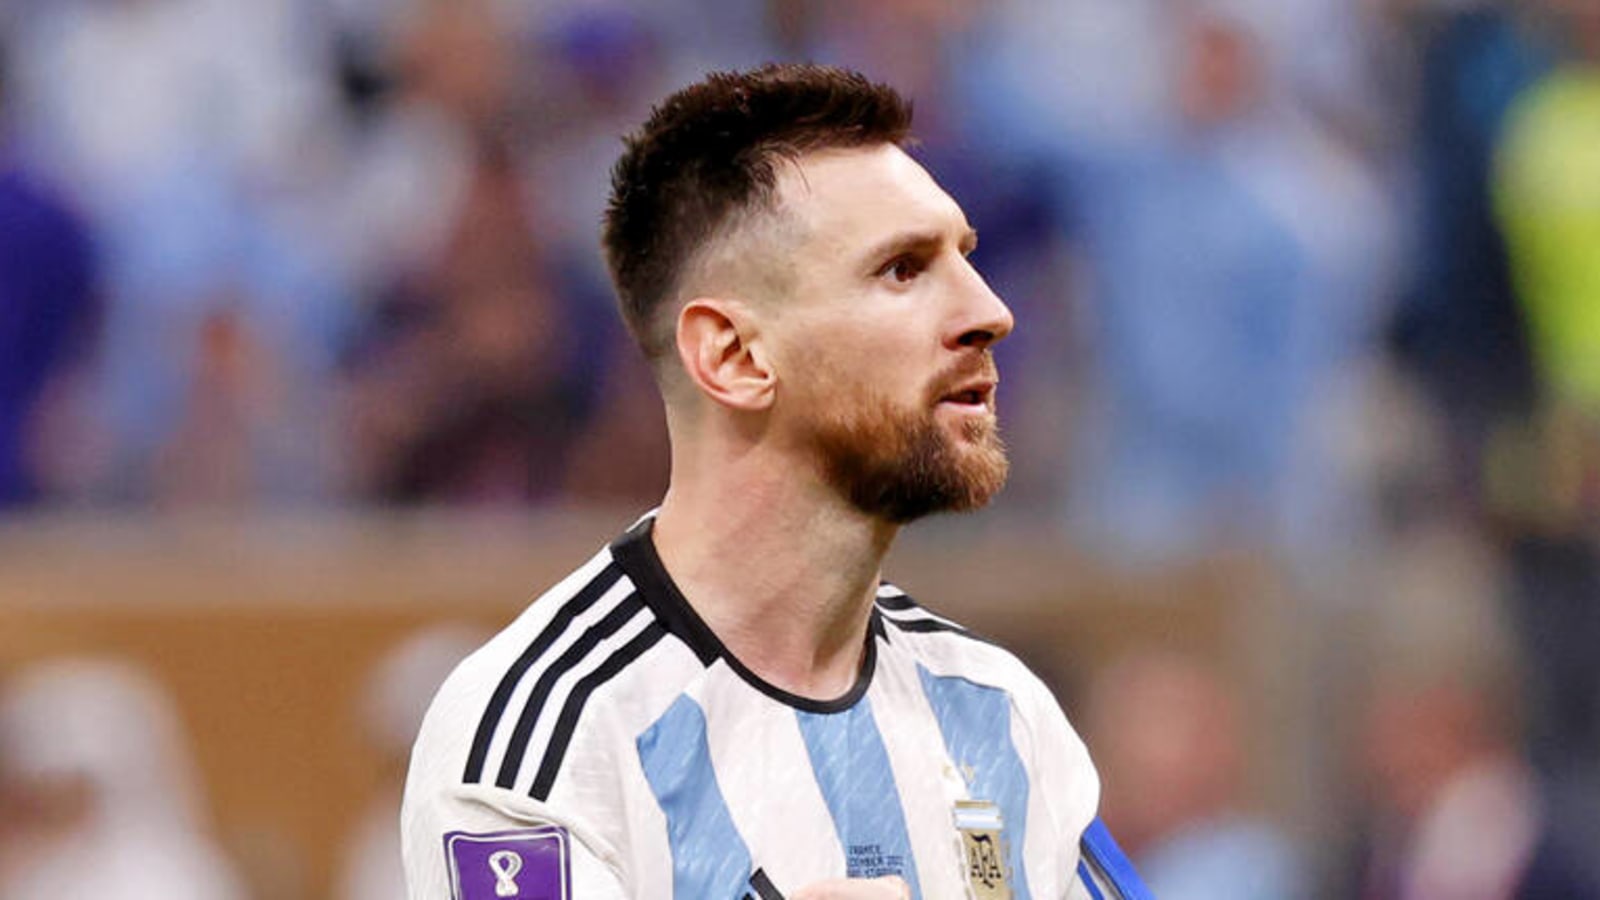 Miss on Messi? That's no problem for growing Saudi soccer league